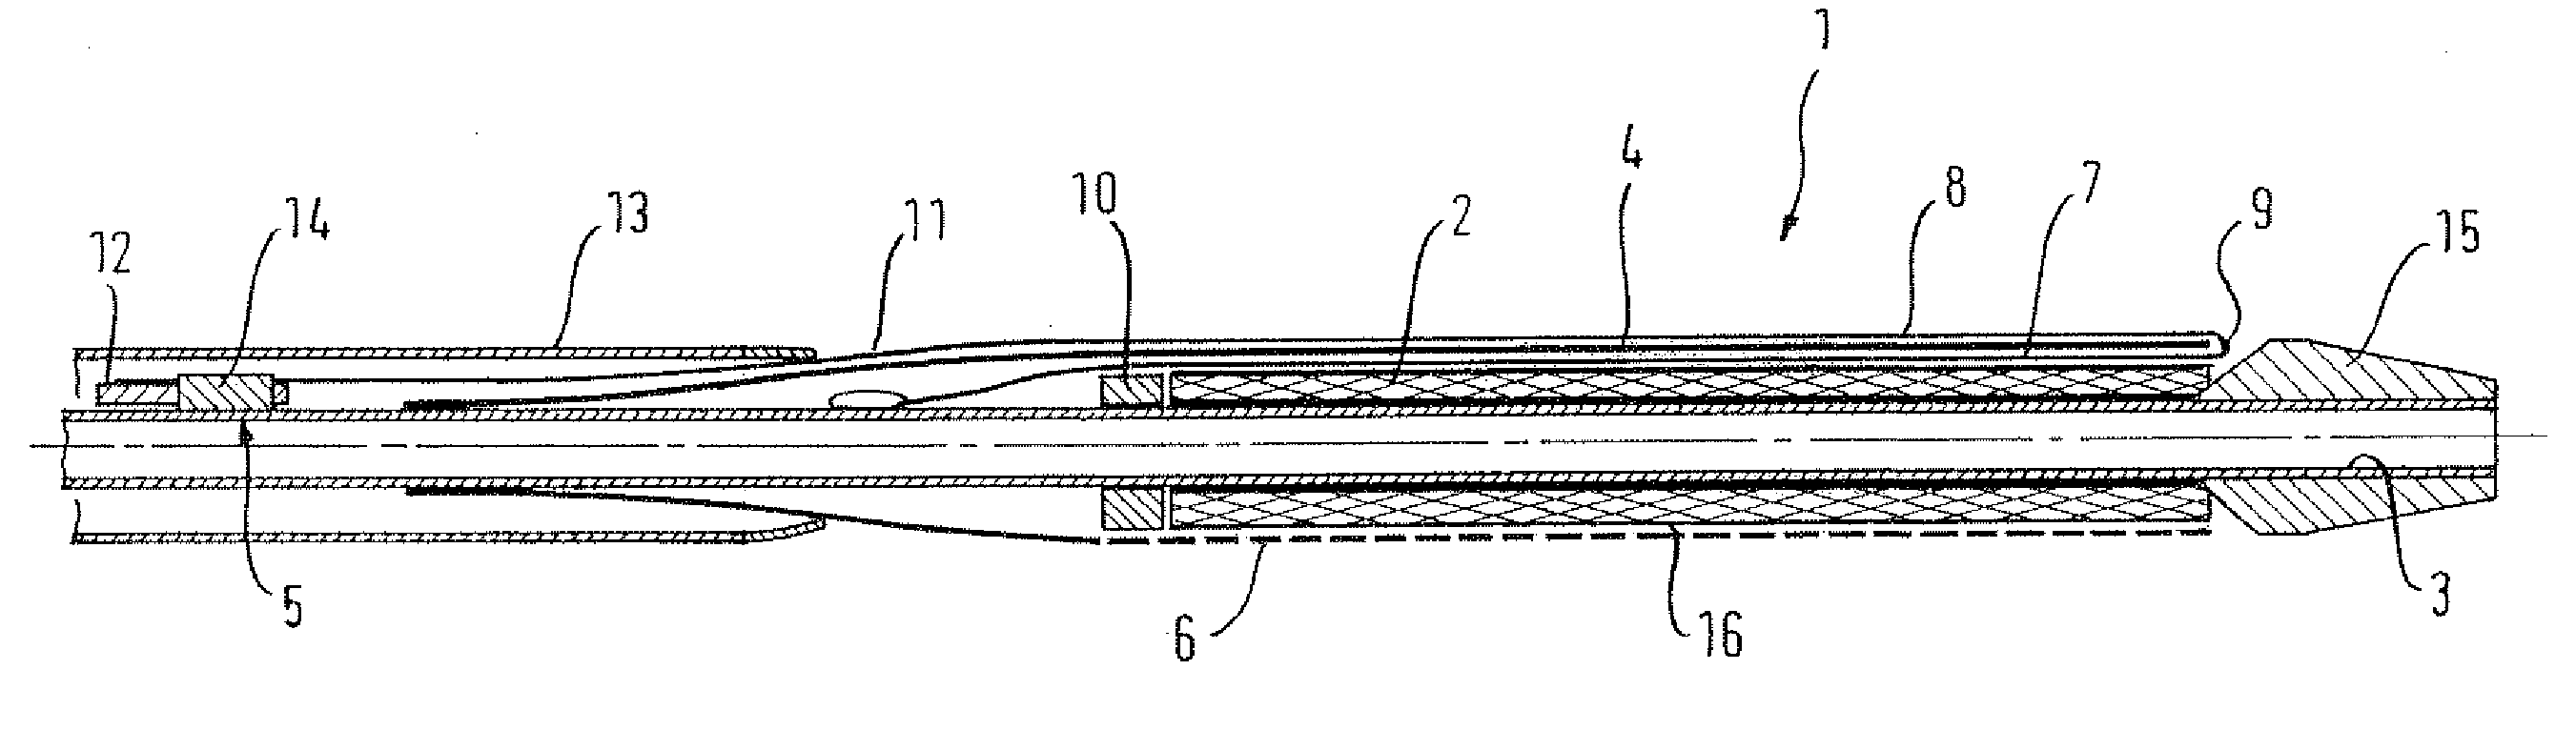 Stent Delivery Device